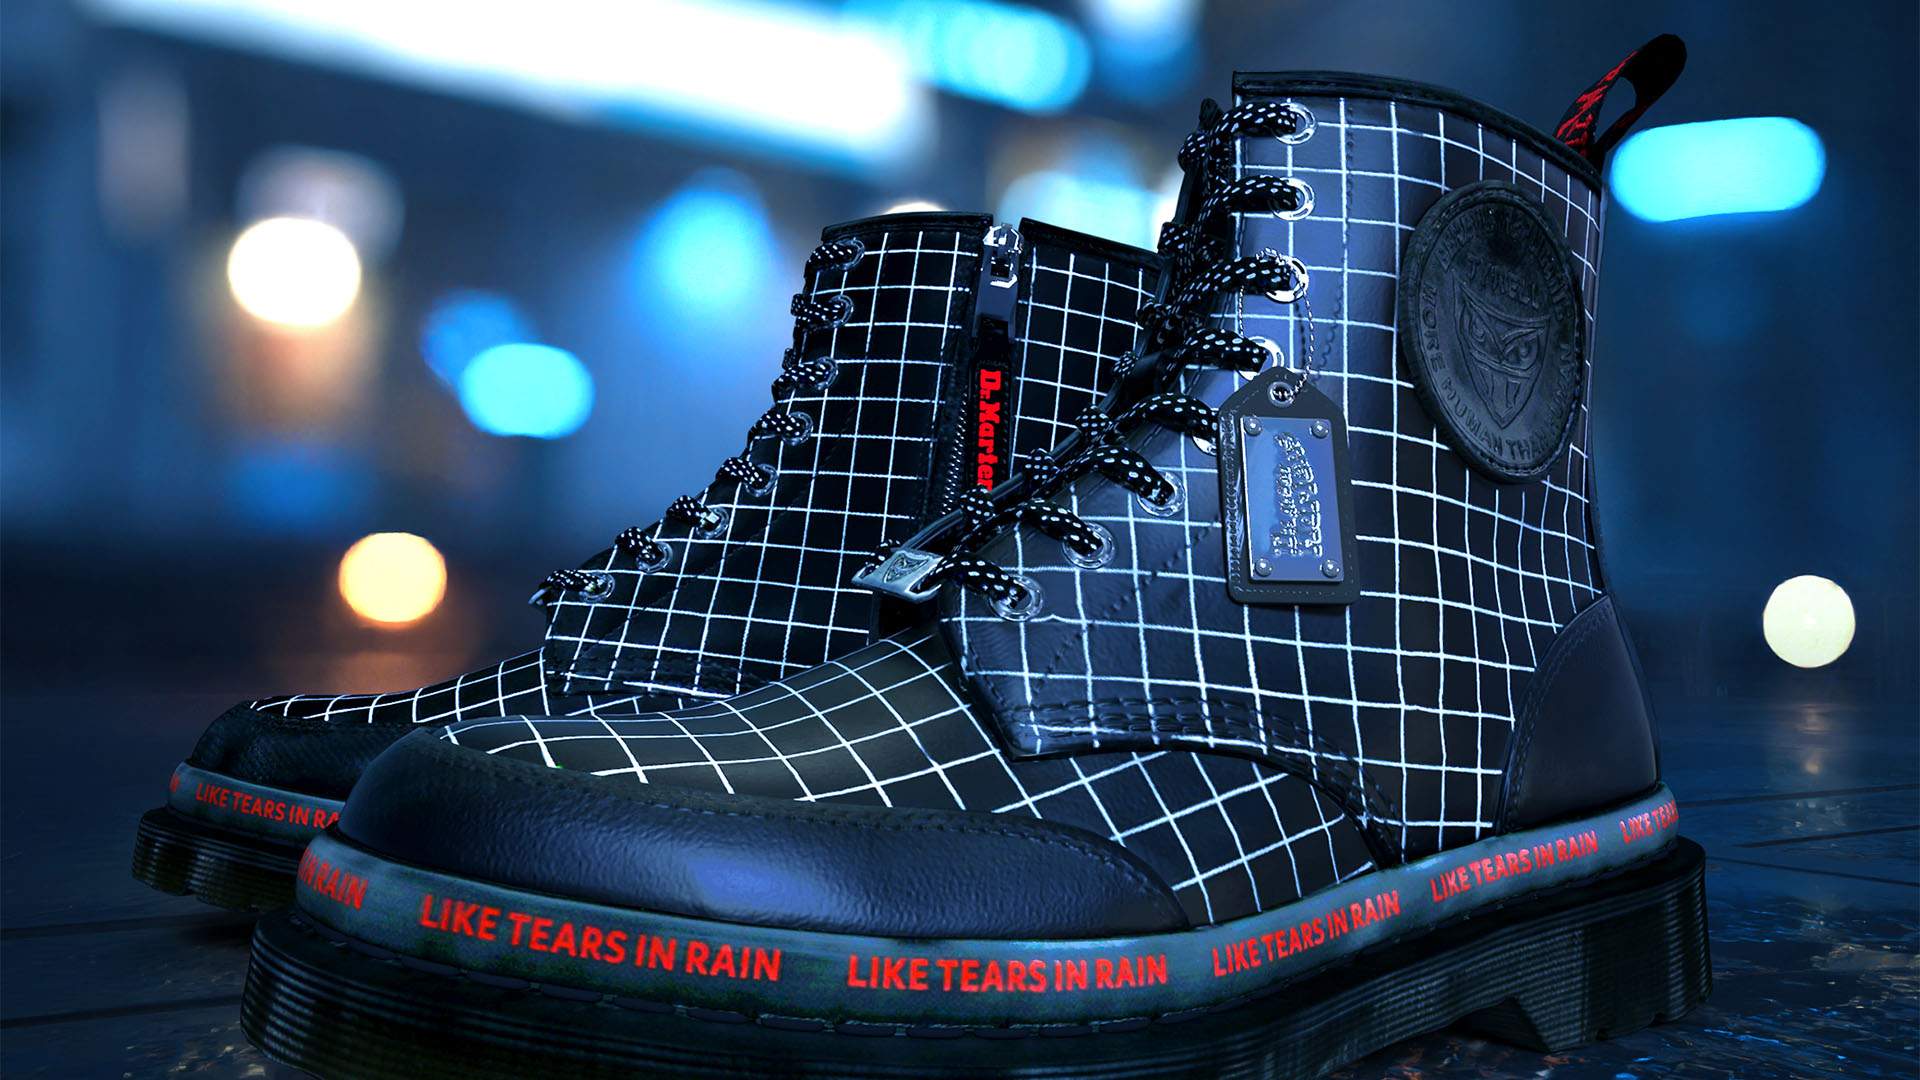 Dr Martens Has Just Dropped New Boots Inspired by 'Blade Runner' and 'Mad Max: Fury Road'